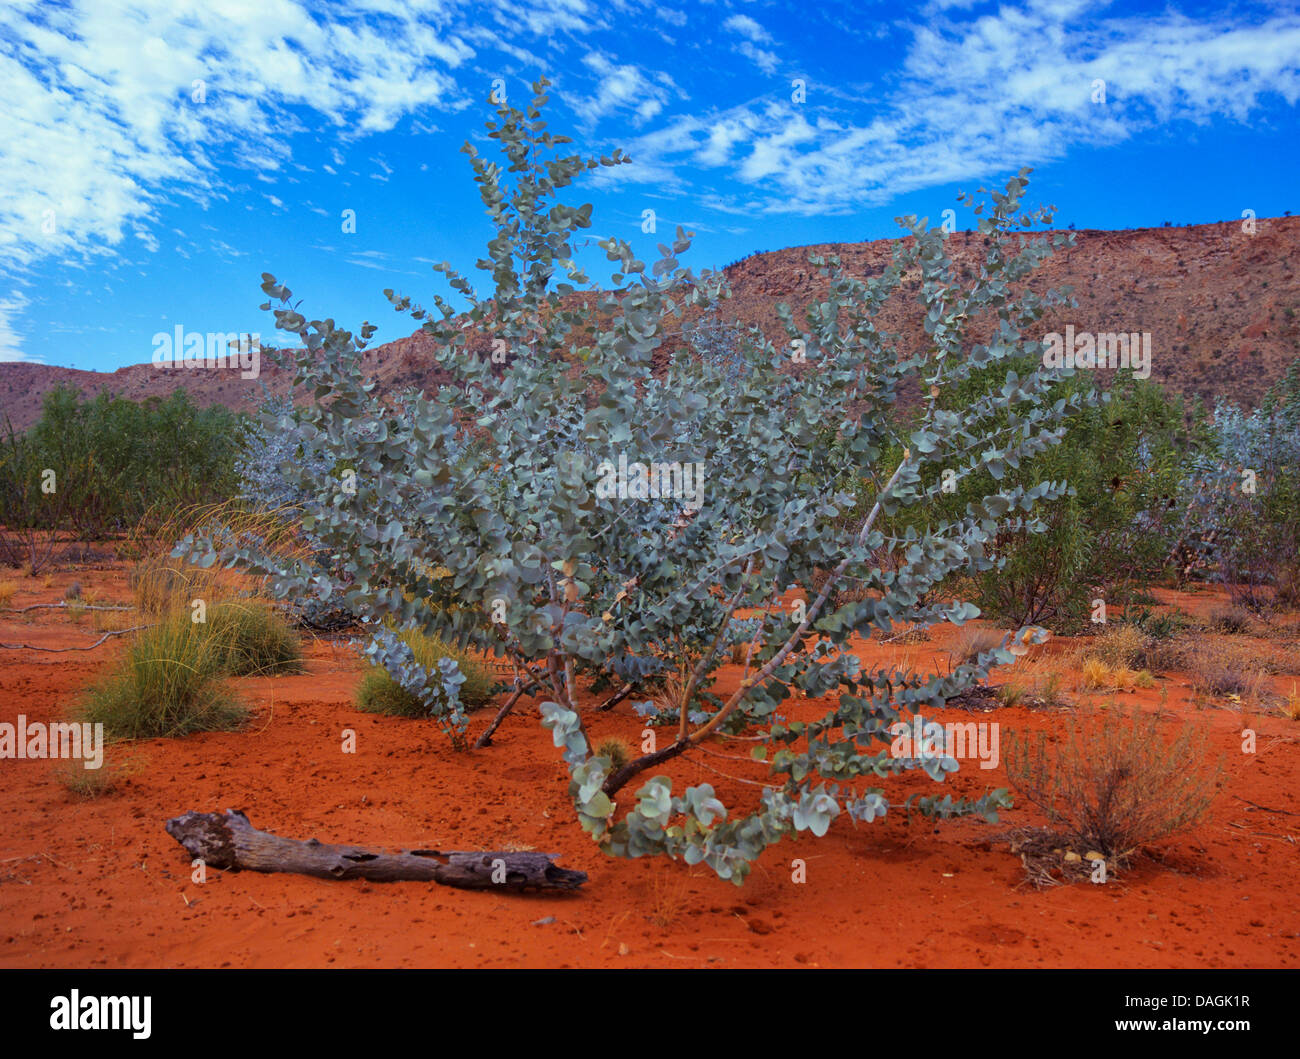 Blue Mallee, Warilu, Blue-leaved Mallee (Eucalyptus gamophylla), in the outback, Australia Stock Photo